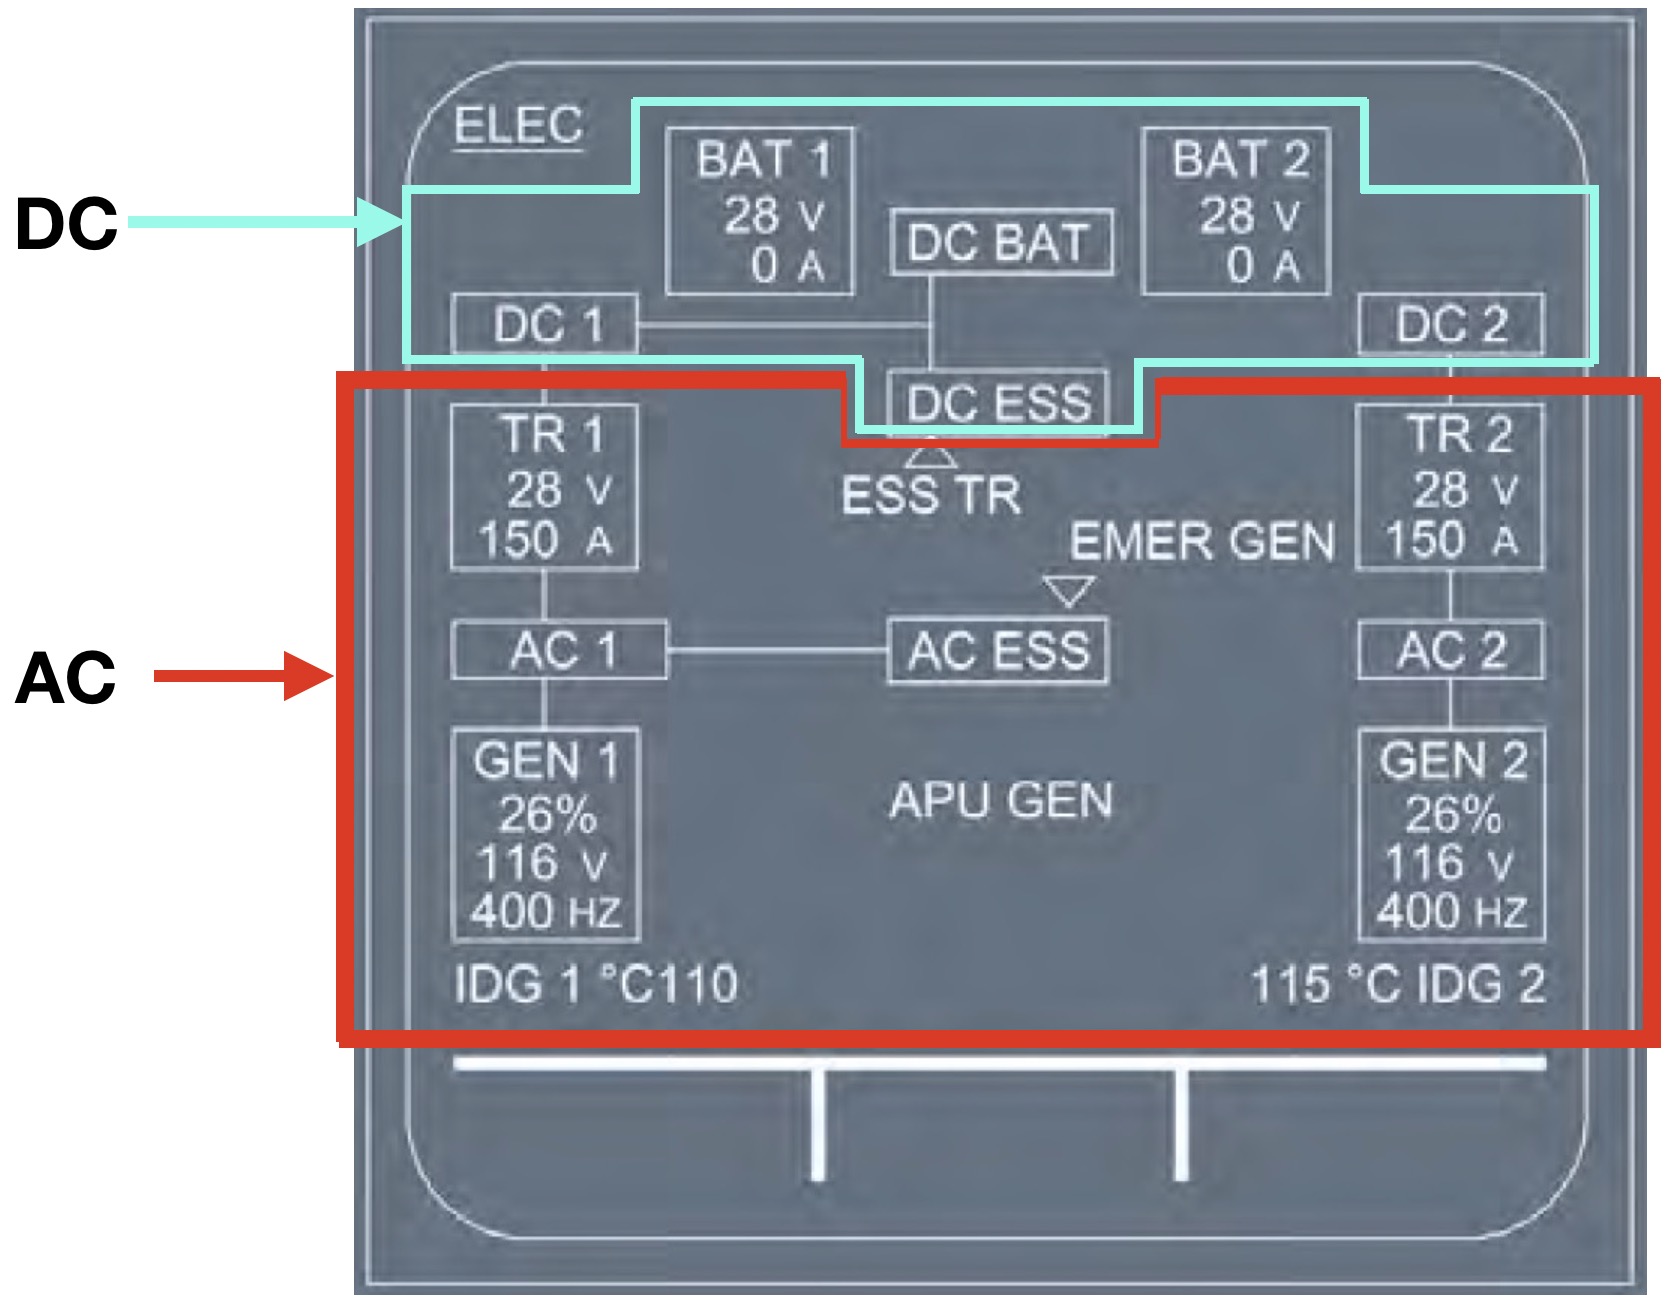 The Airbus A320's electrical system is divided into an AC system and a DC system.